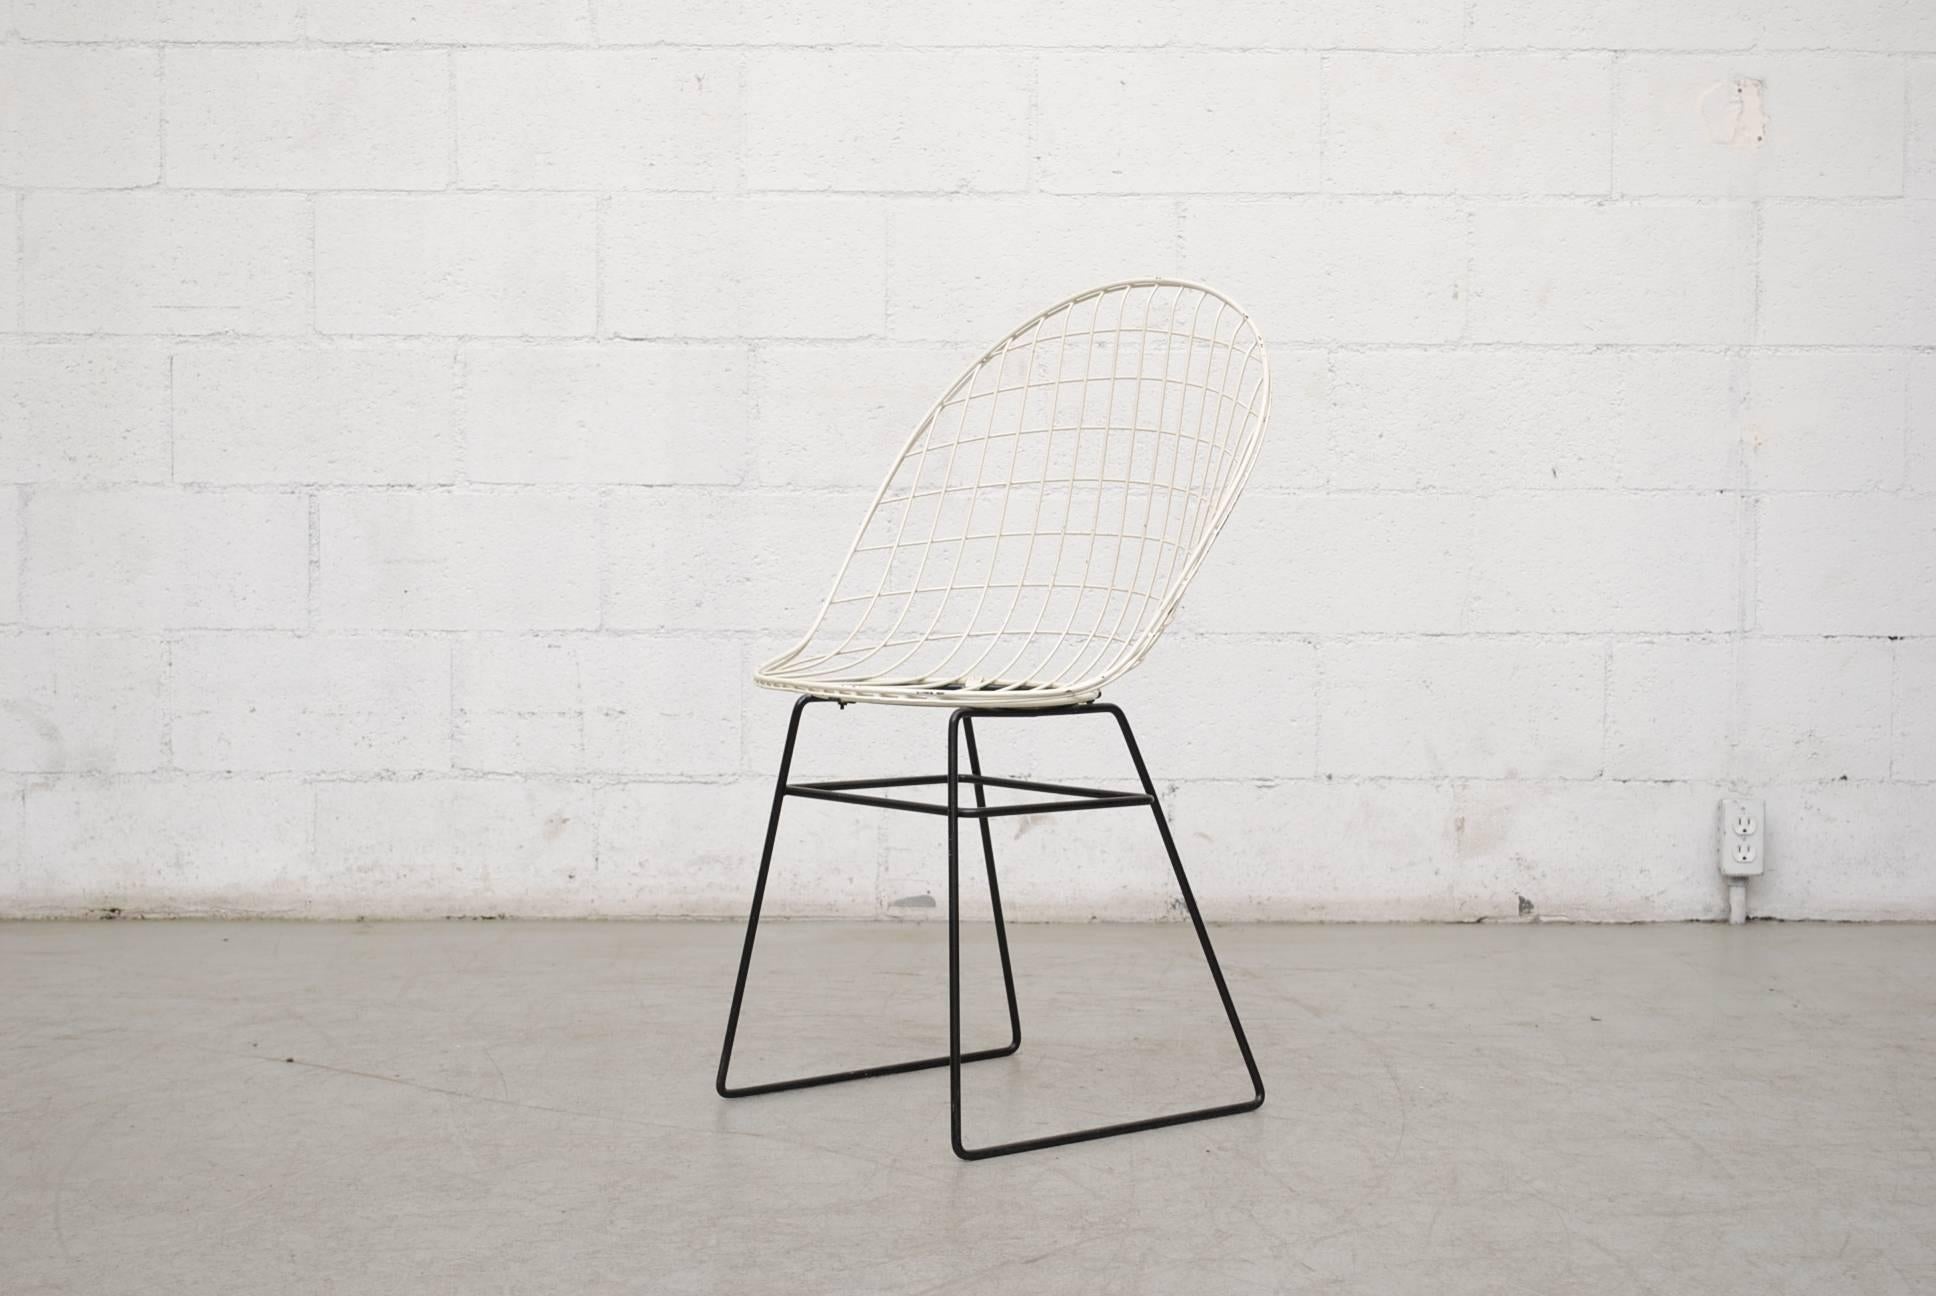 White wire enameled metal chair by Cees Braakman and Adriaan Dekker for Pastoe with black enameled metal frame in original condition with visible signs of wear consistent with its age and usage.